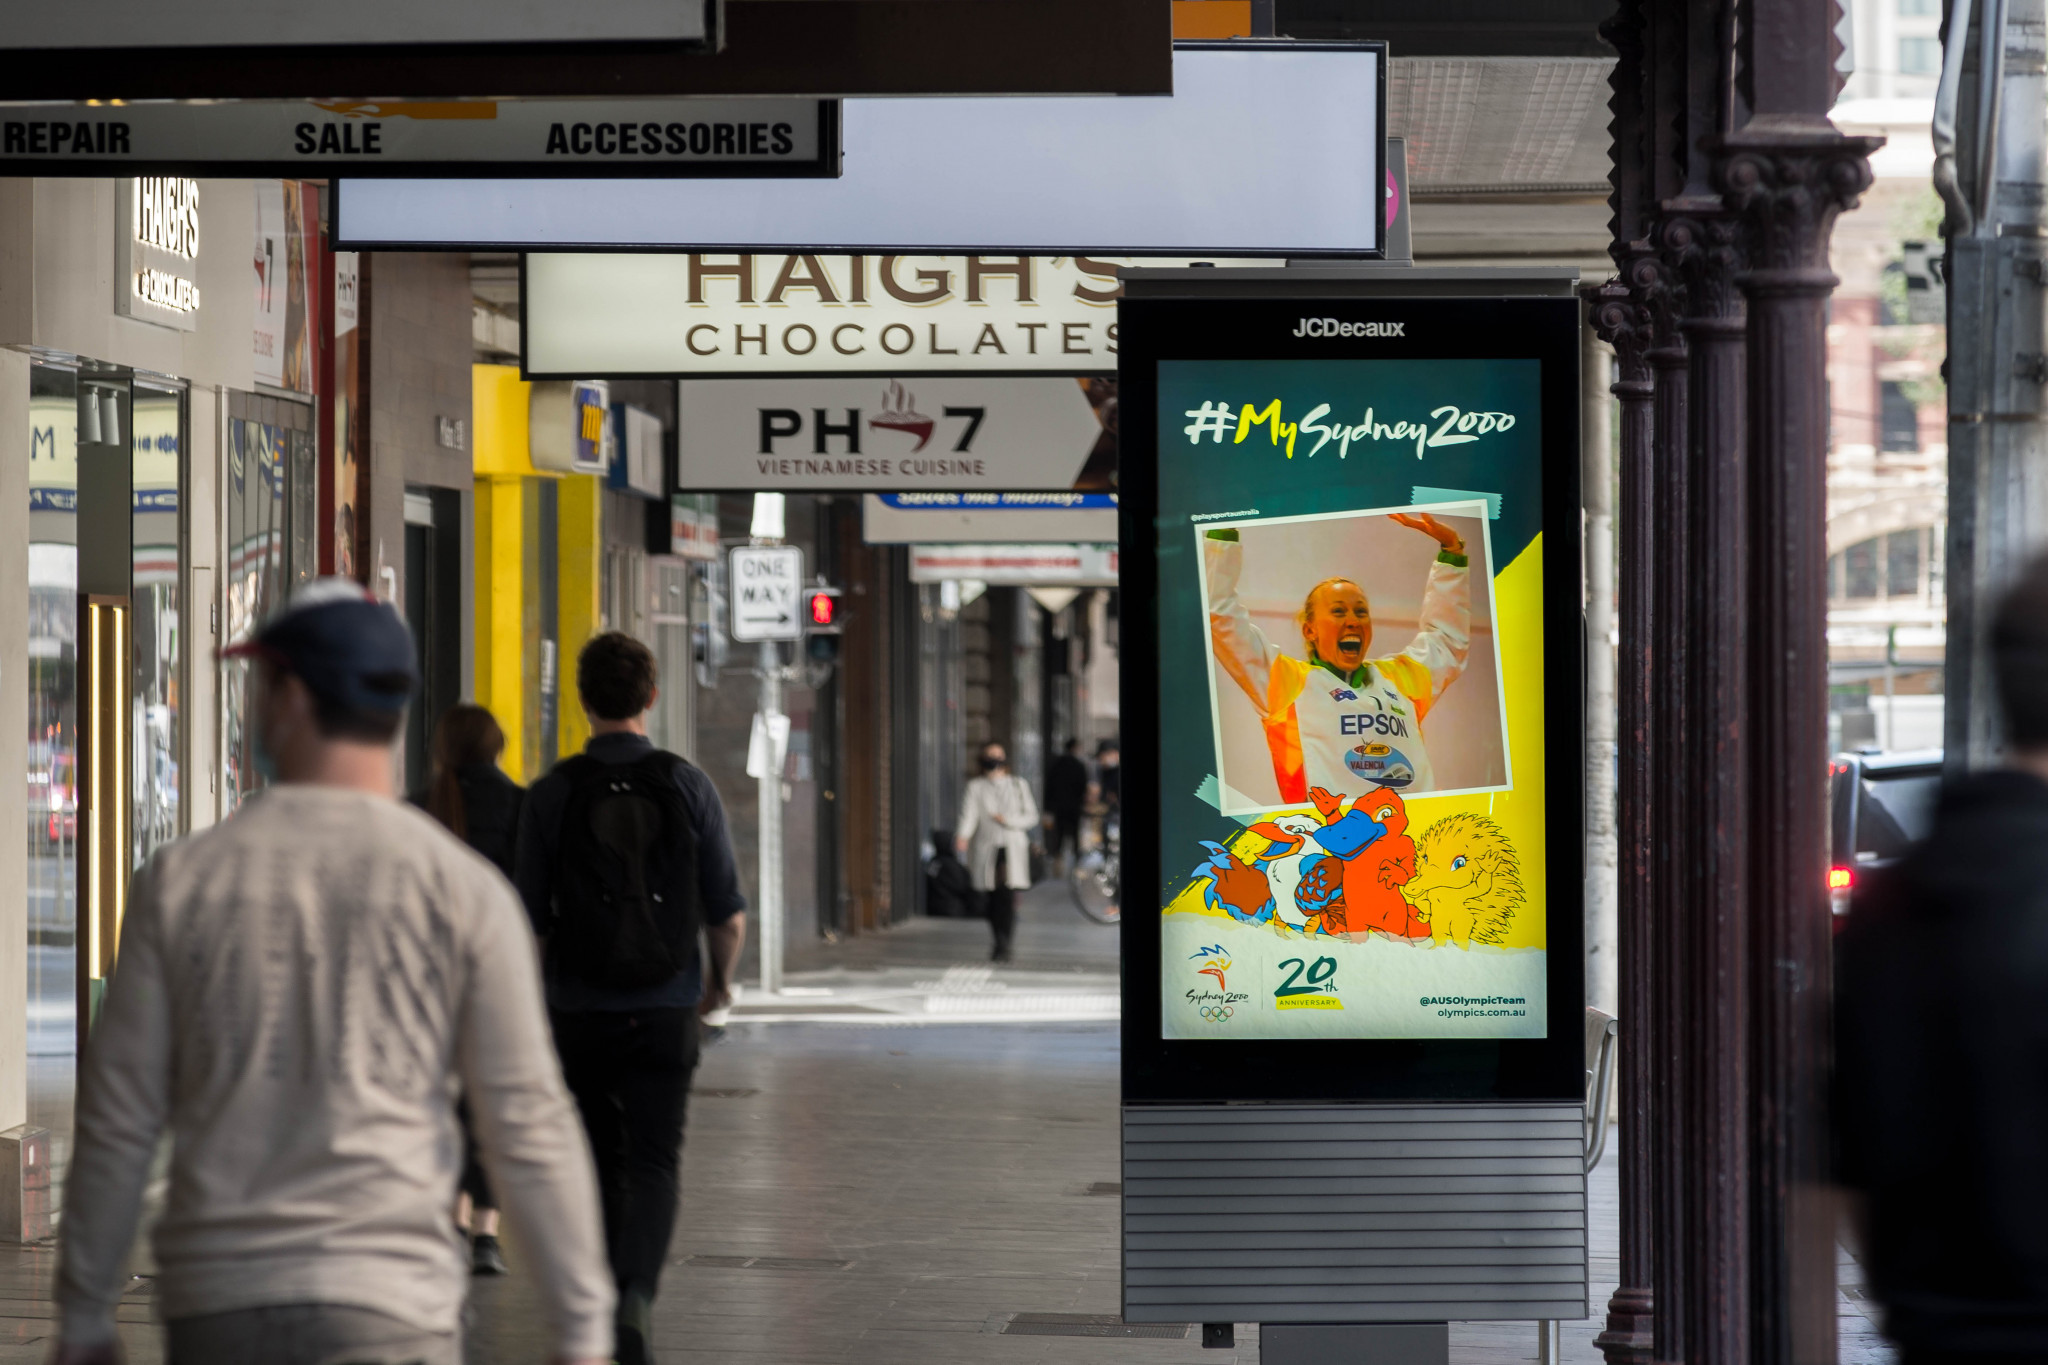 Photo memories of Sydney 2000 were shared on screens across JCDecaux’s digital network ©AOC